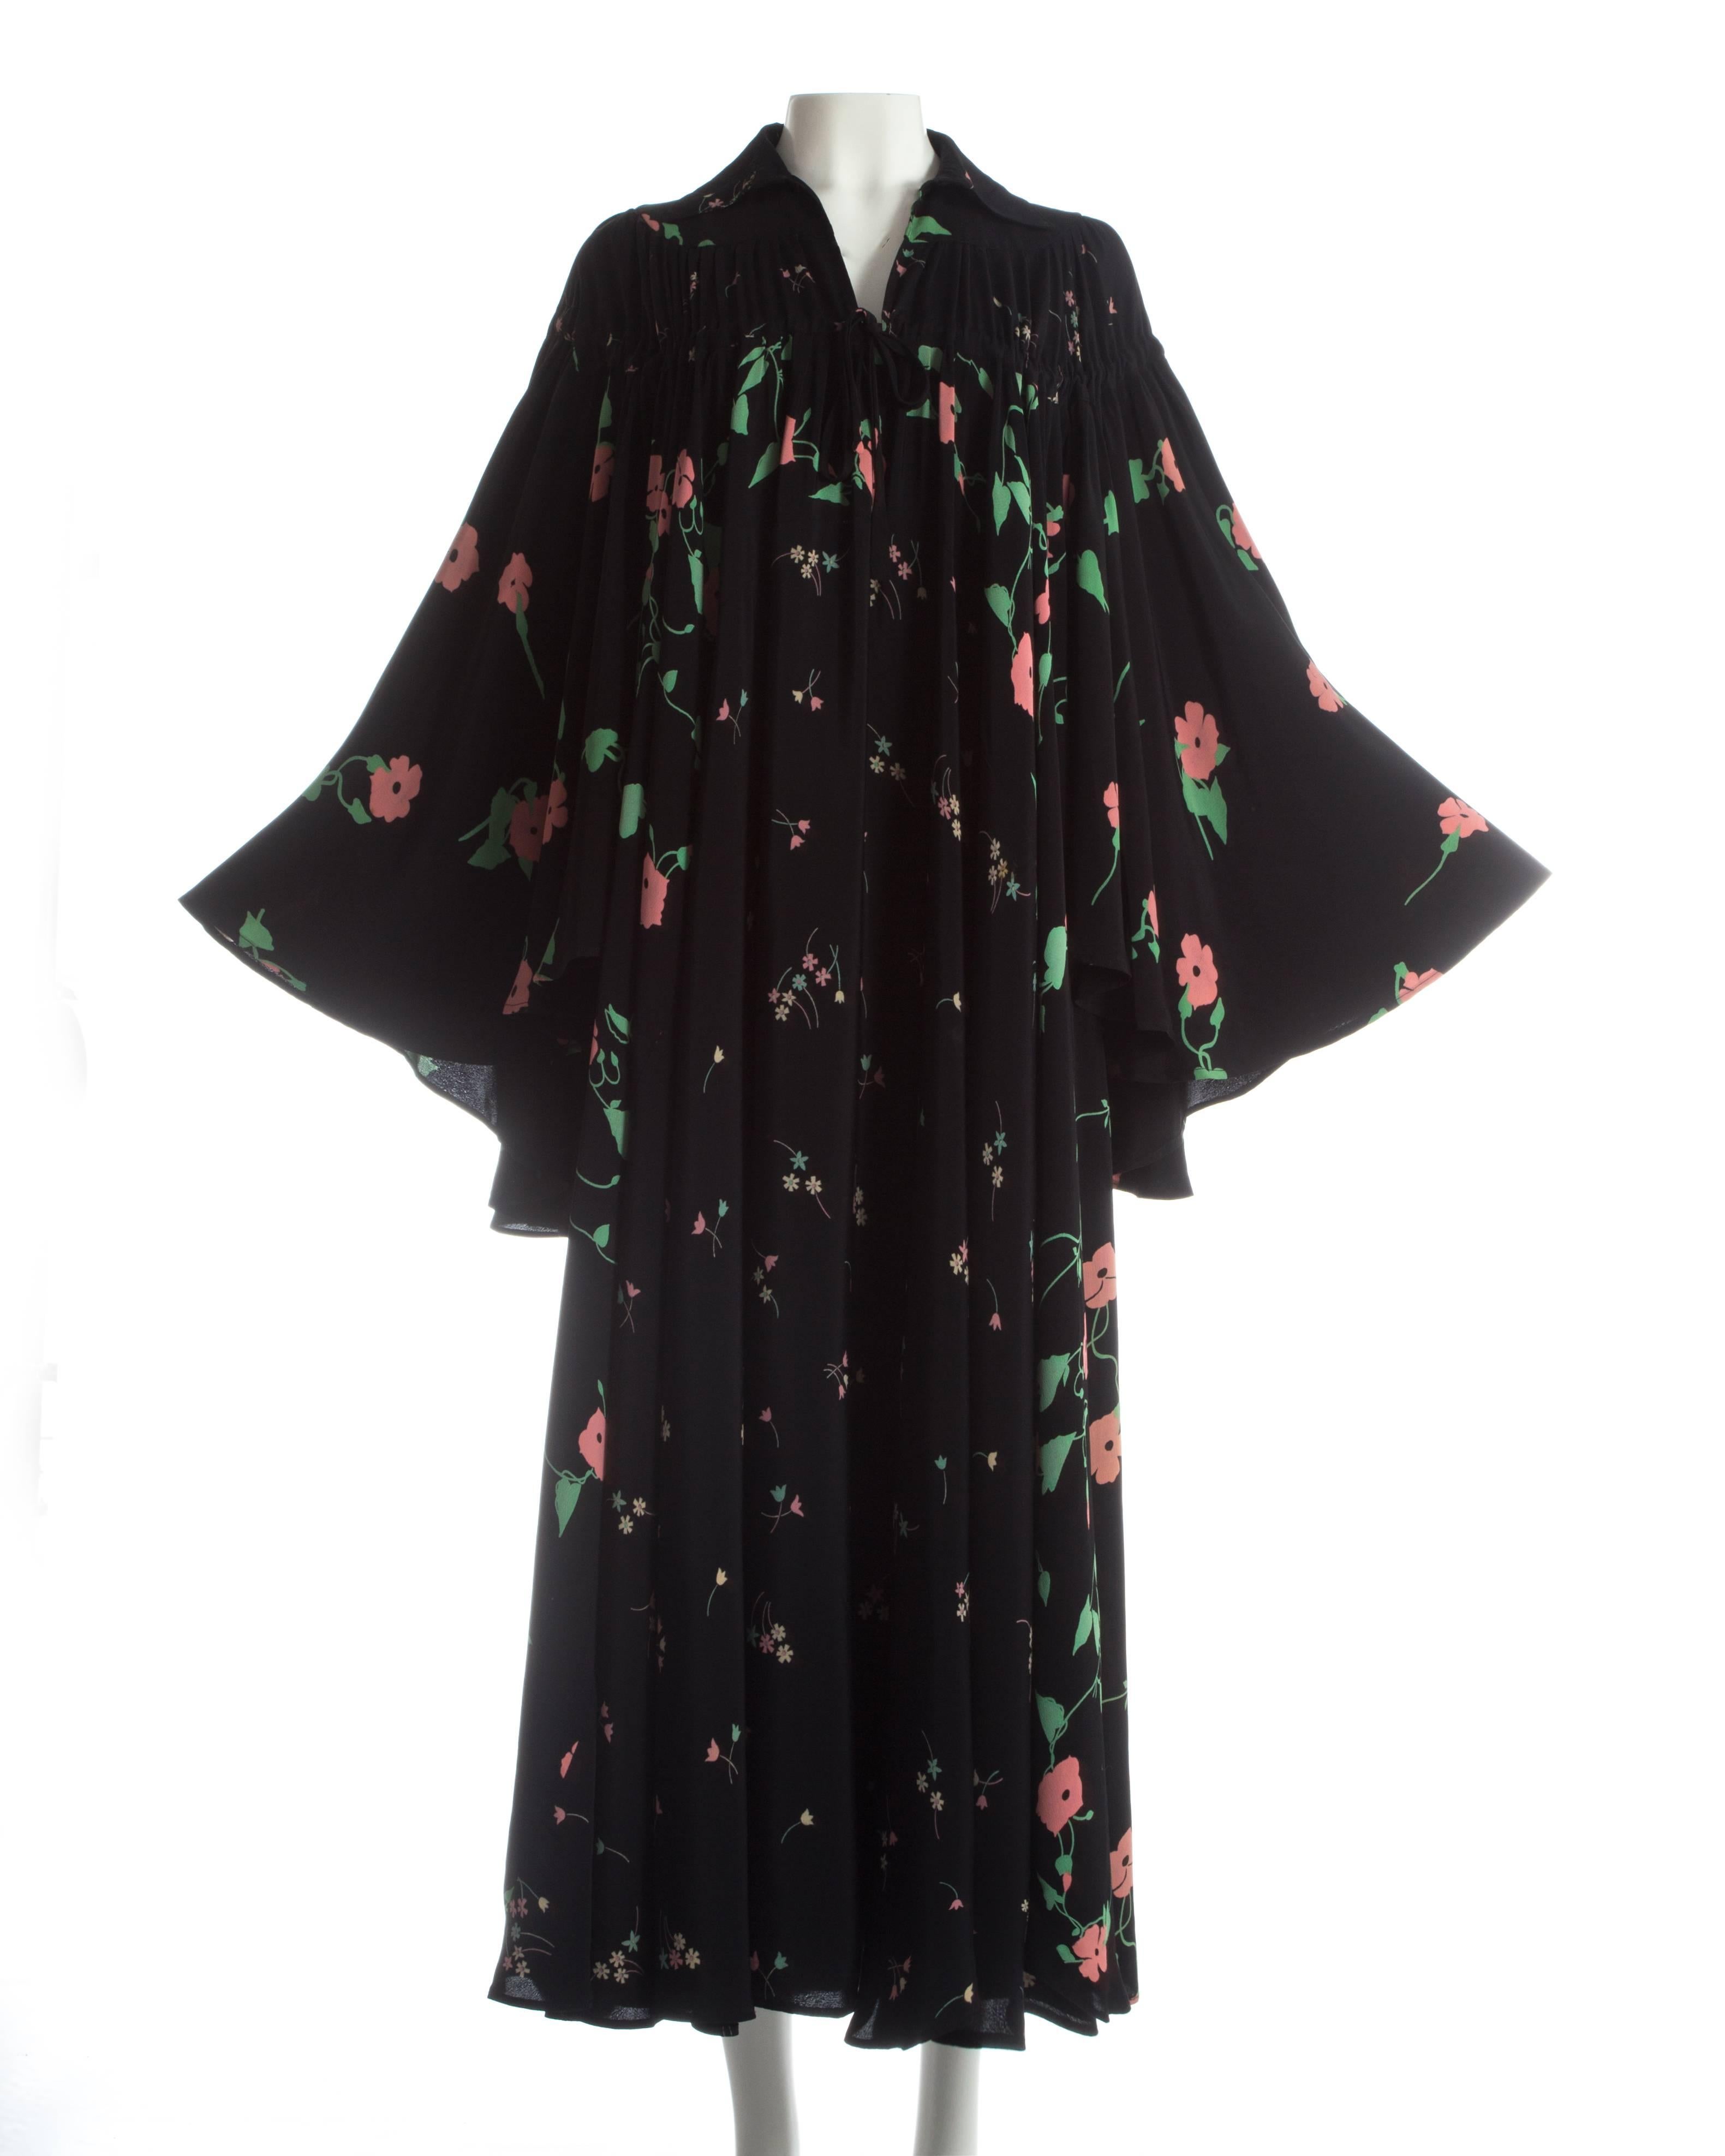 - 'Busy Lizzie' floral pink and green print by Celia Birtwell
- Drawstring fastening on yoke 
- Extra wide angel sleeves 
- Masses of fabric 

ca. 1971 